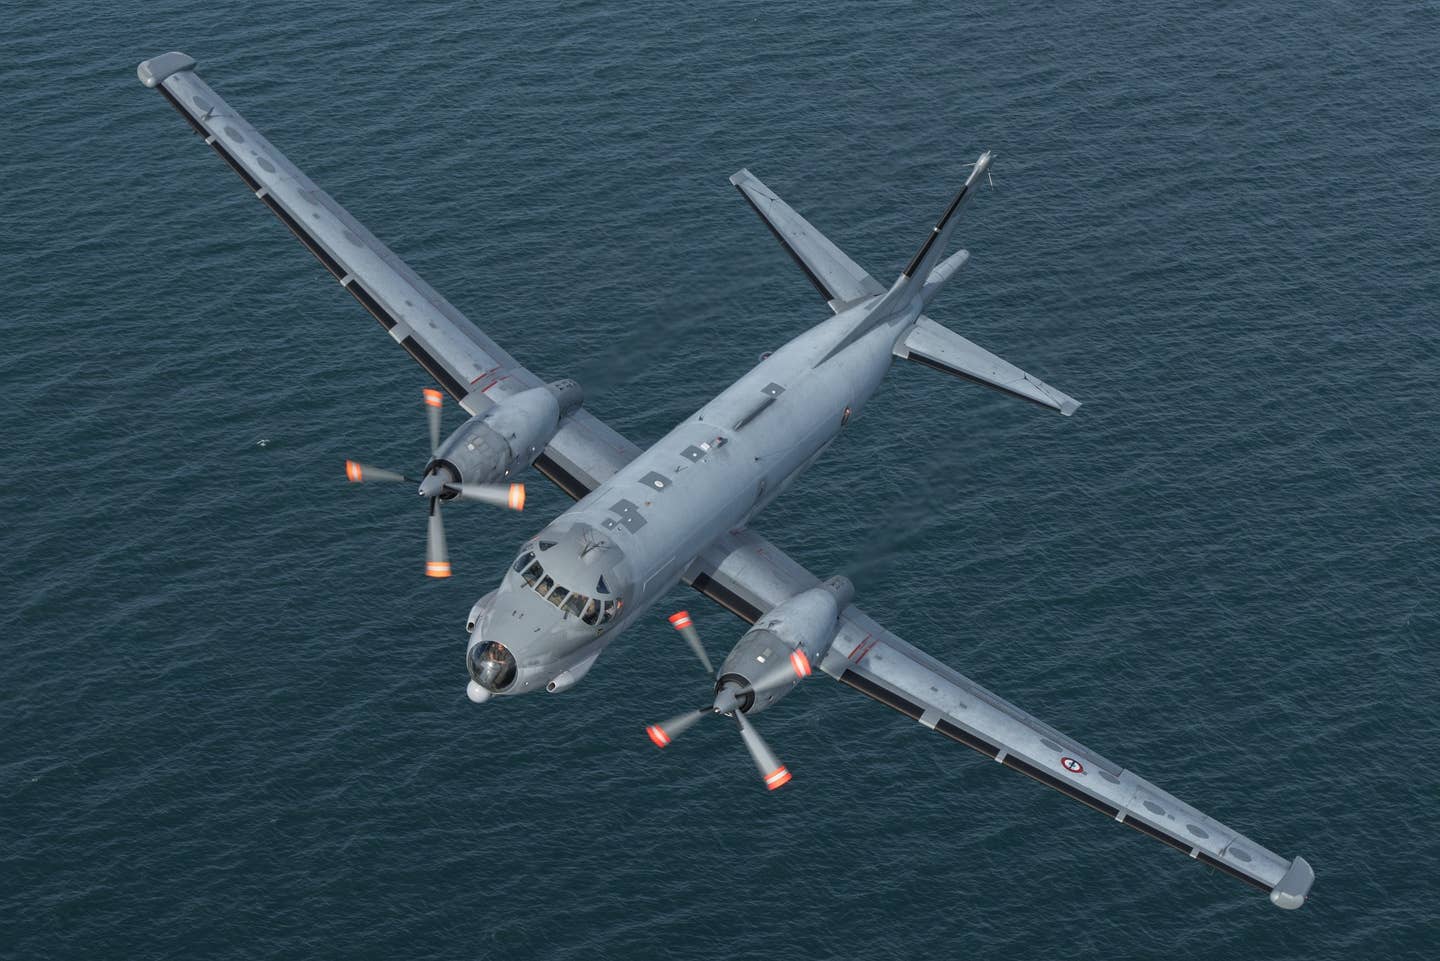 A French Navy Atlantique 2 maritime patrol aircraft in its traditional operating element. <em>Dassault Aviation</em>